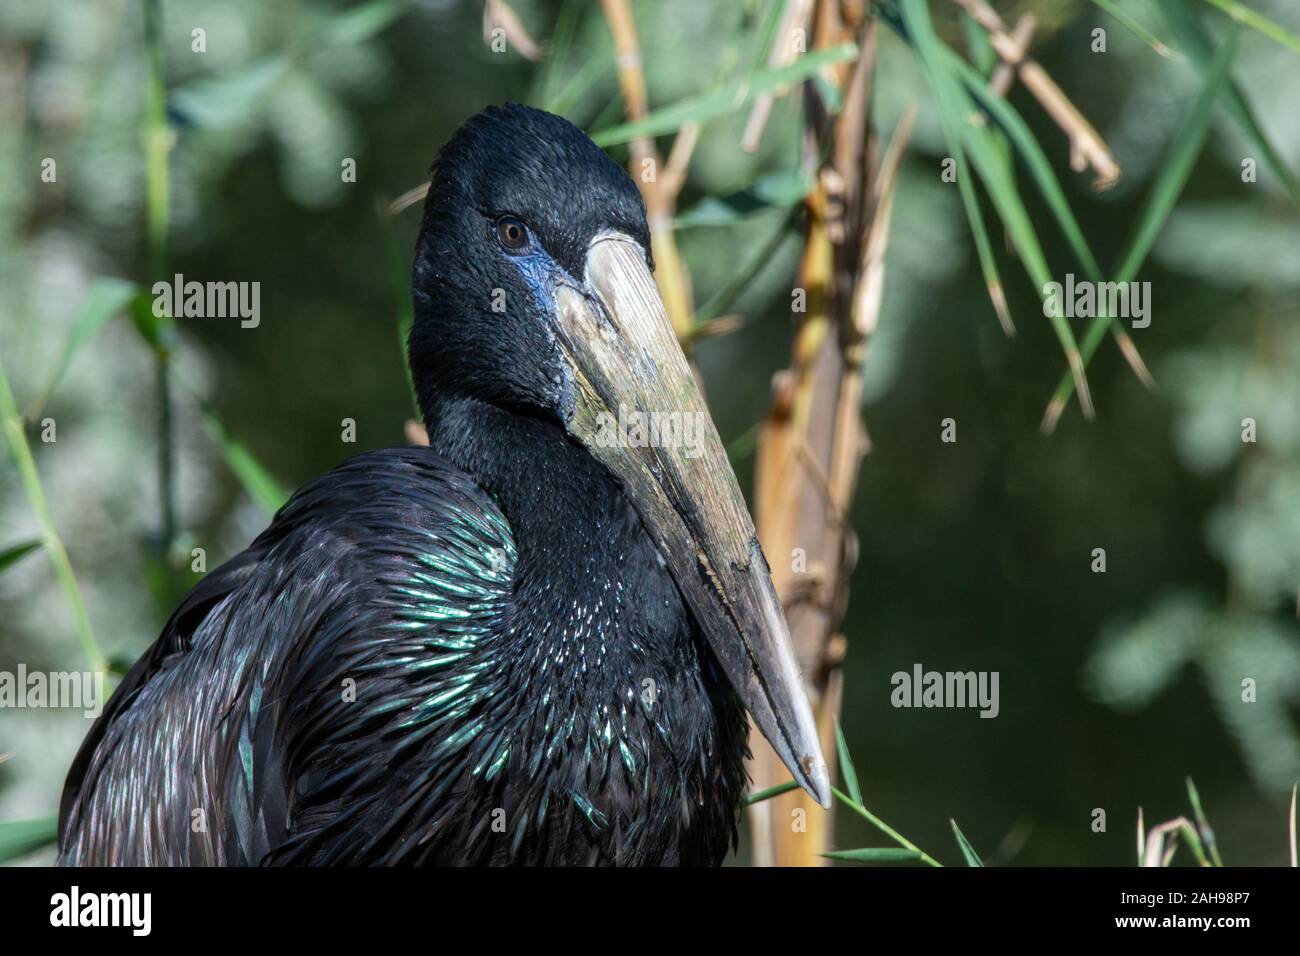 The African openbill (Anastomus lamelligerus) is a species of stork in the family Ciconiidae standing in the grass showing its glossy black feathers. Stock Photo